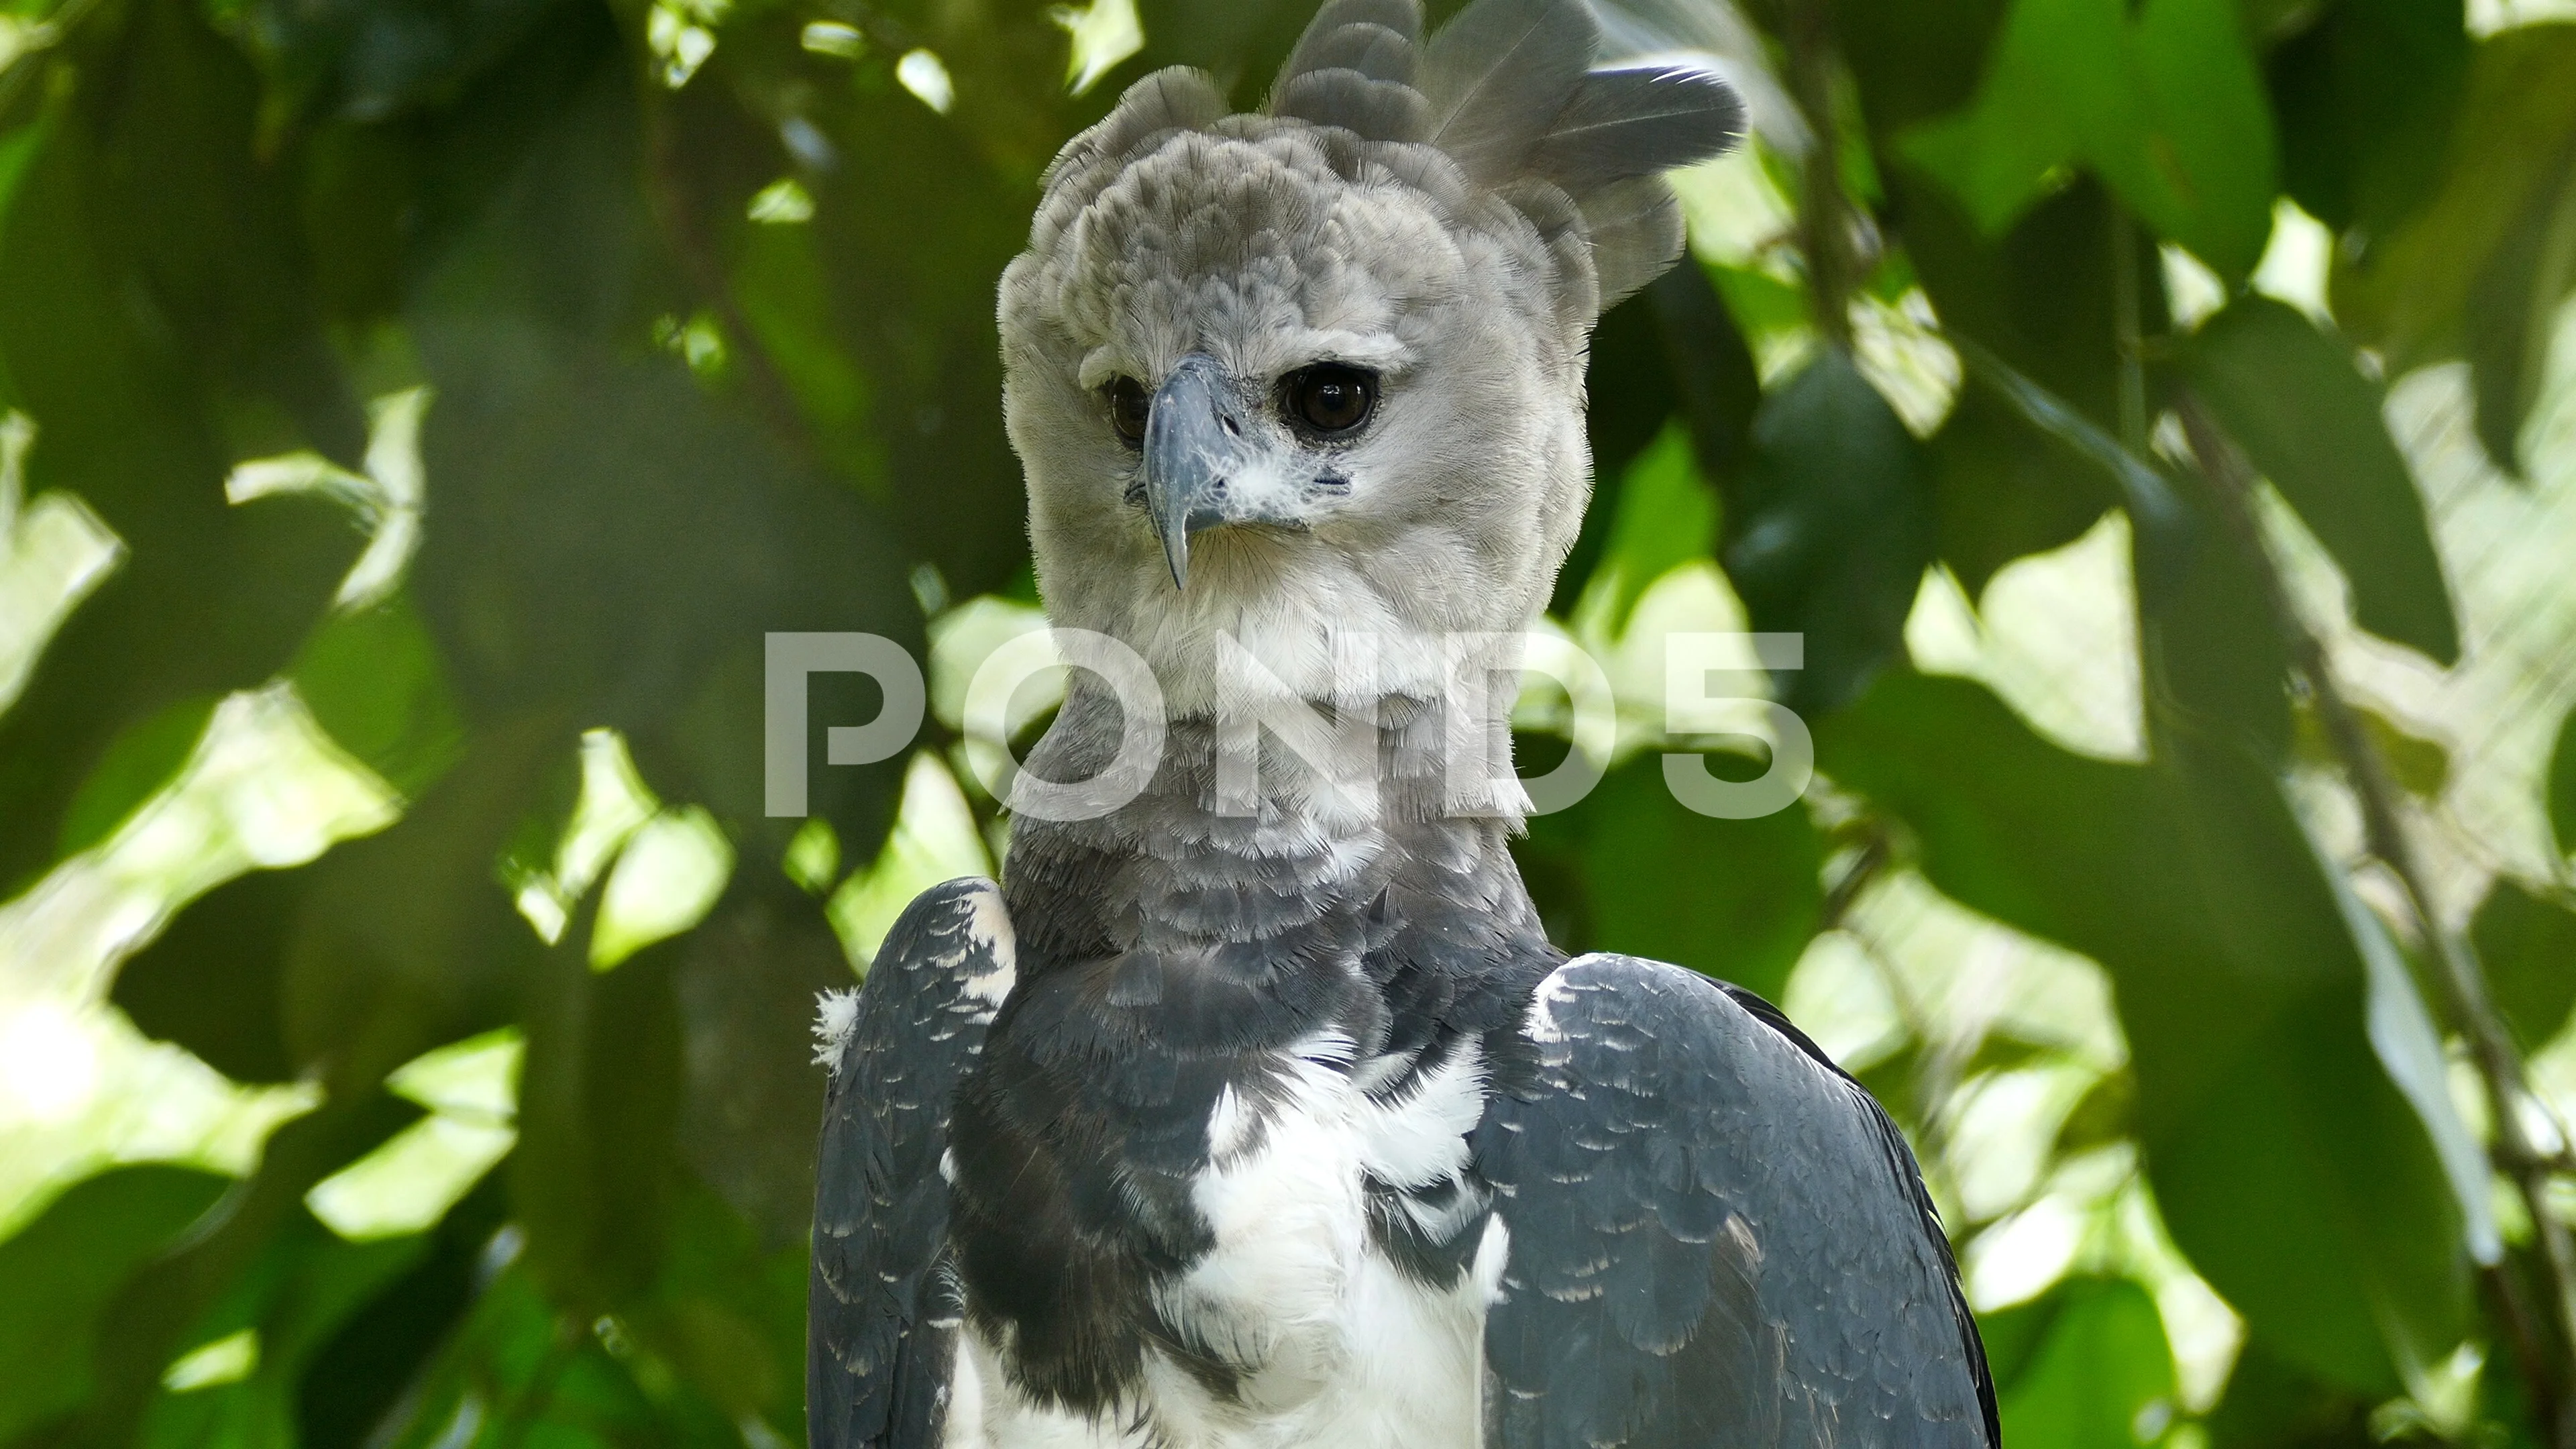 Harpy eagle from my pre drawn stuff. Stoked on how this one turned